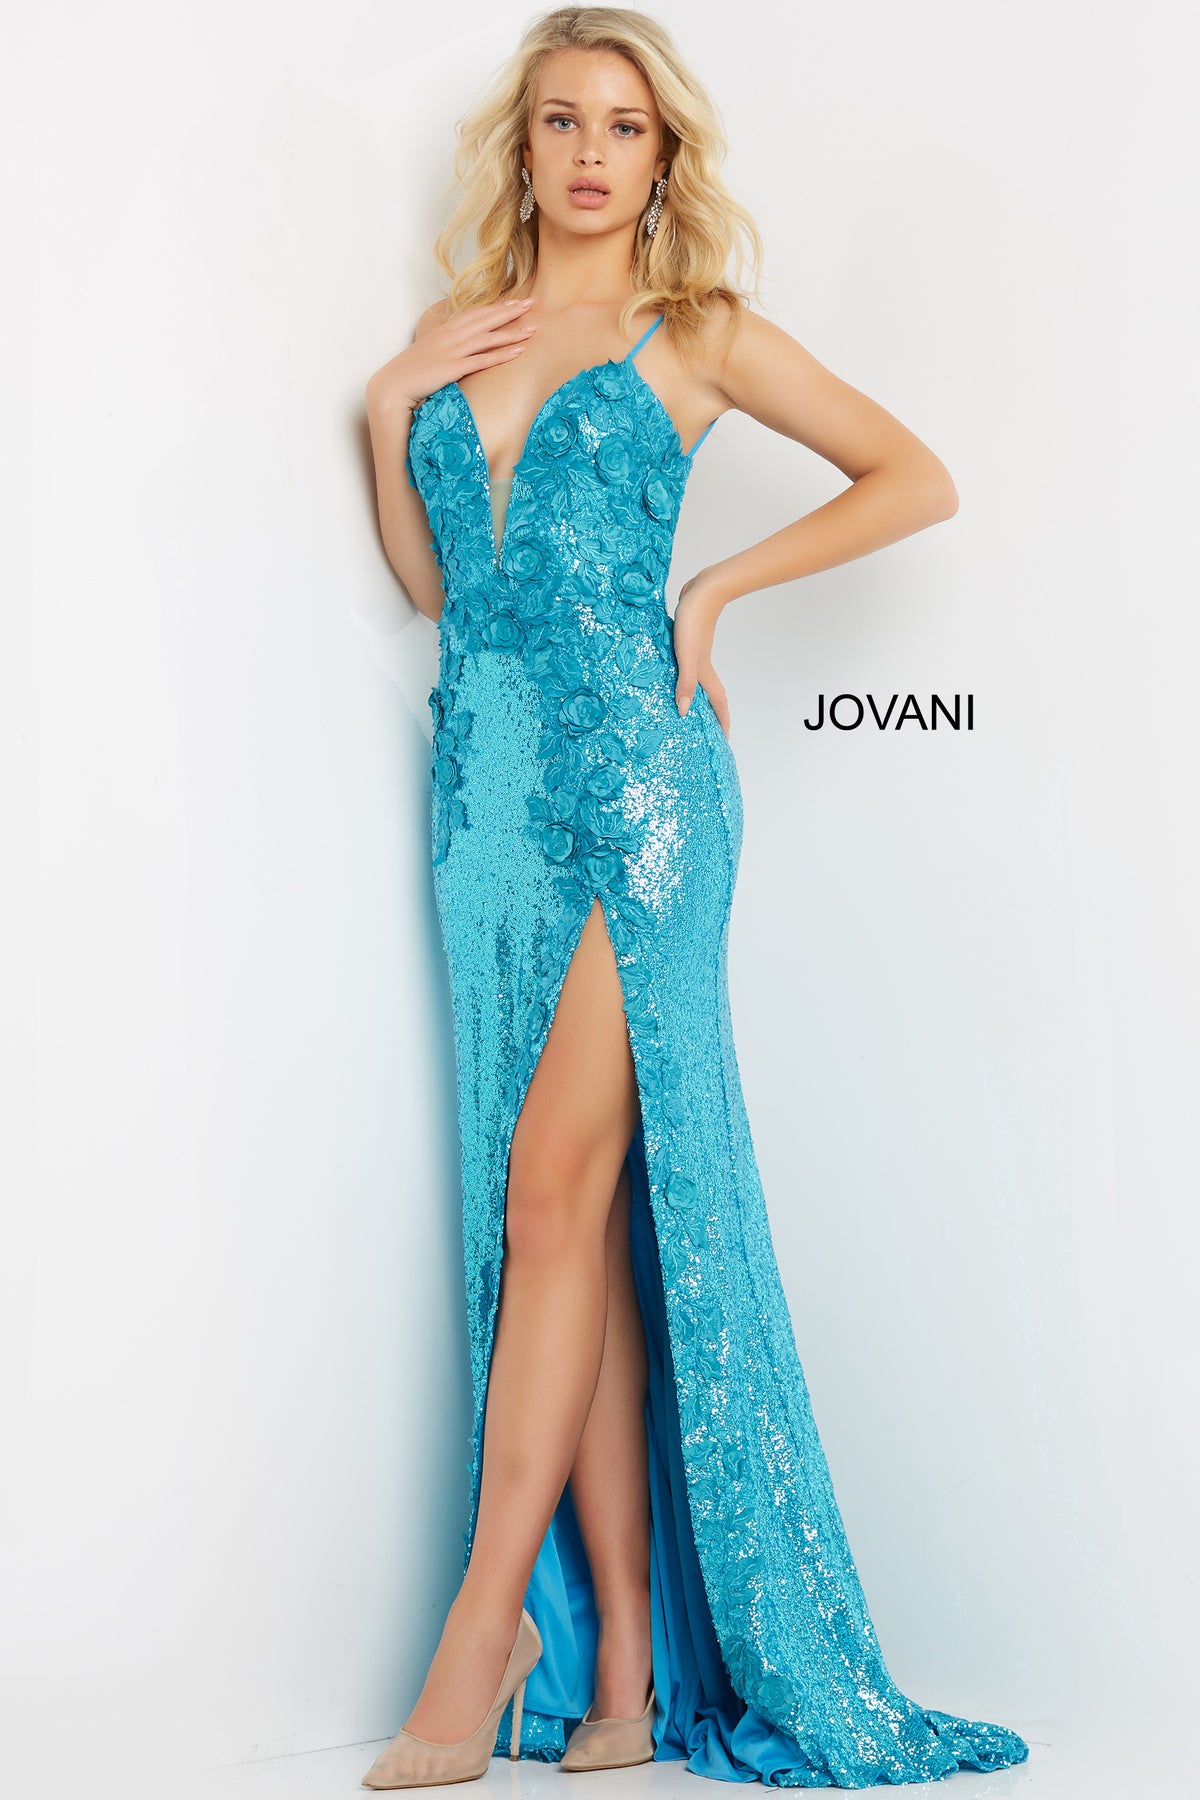 Jovani 1012 long sequins gown with a sexy low back and leg slit – Mia ...